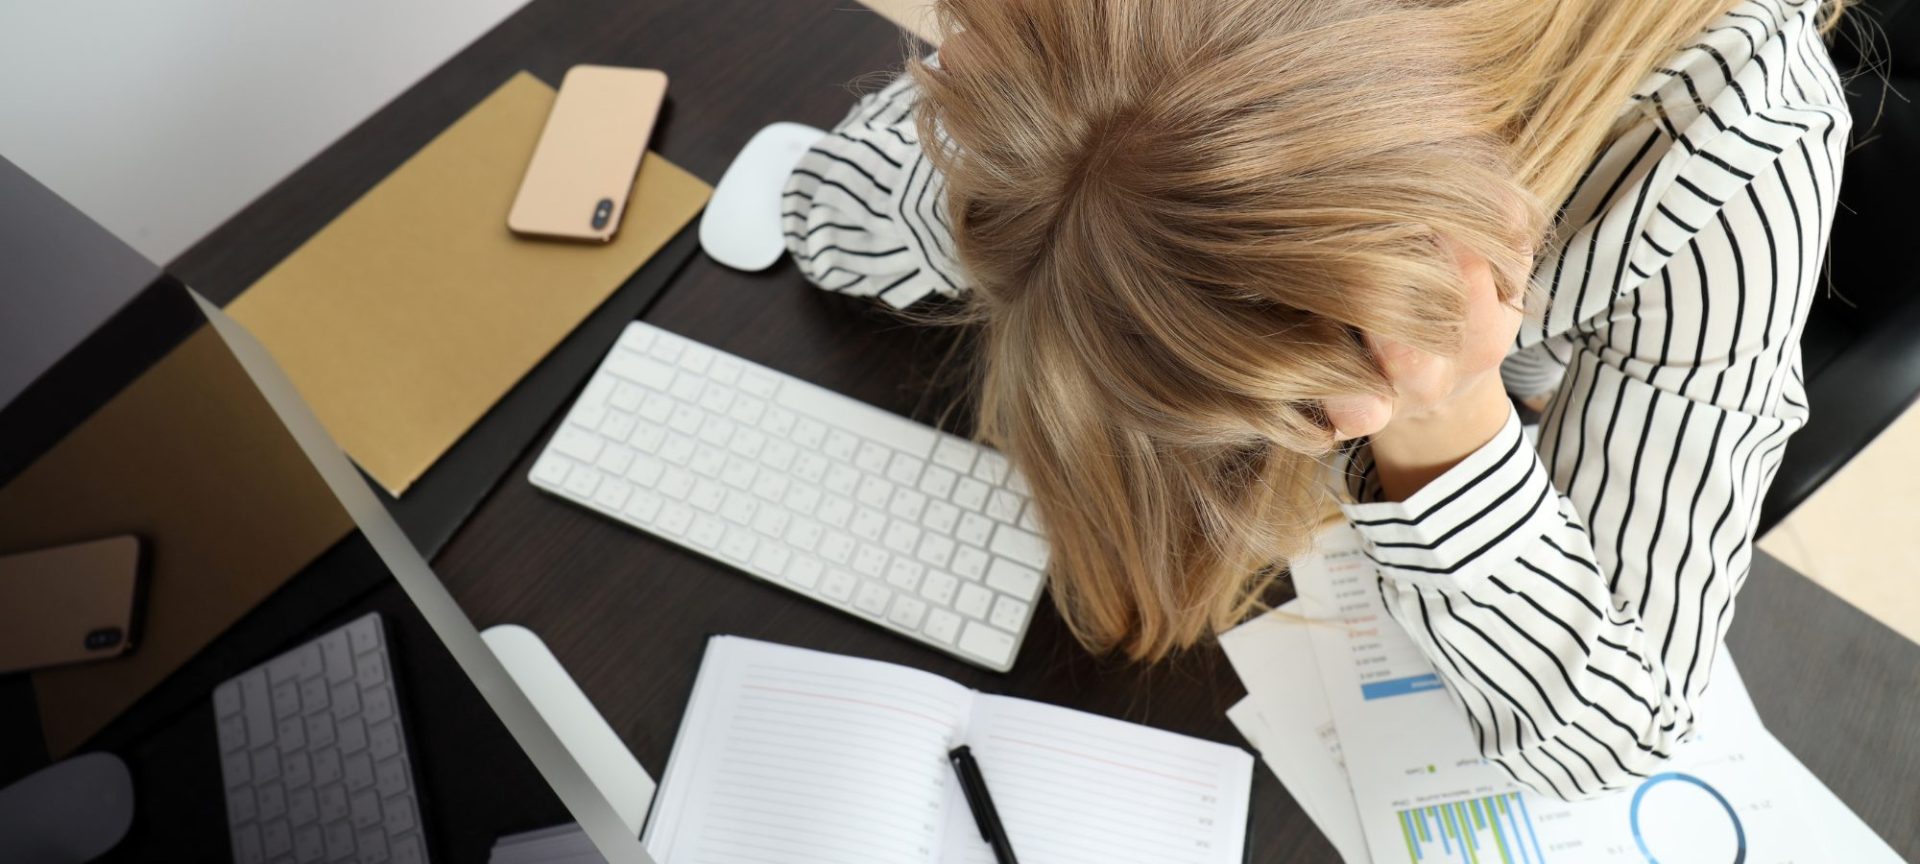 I hate my job: 6 signs you are having a mid-career crisis (and what to do next)